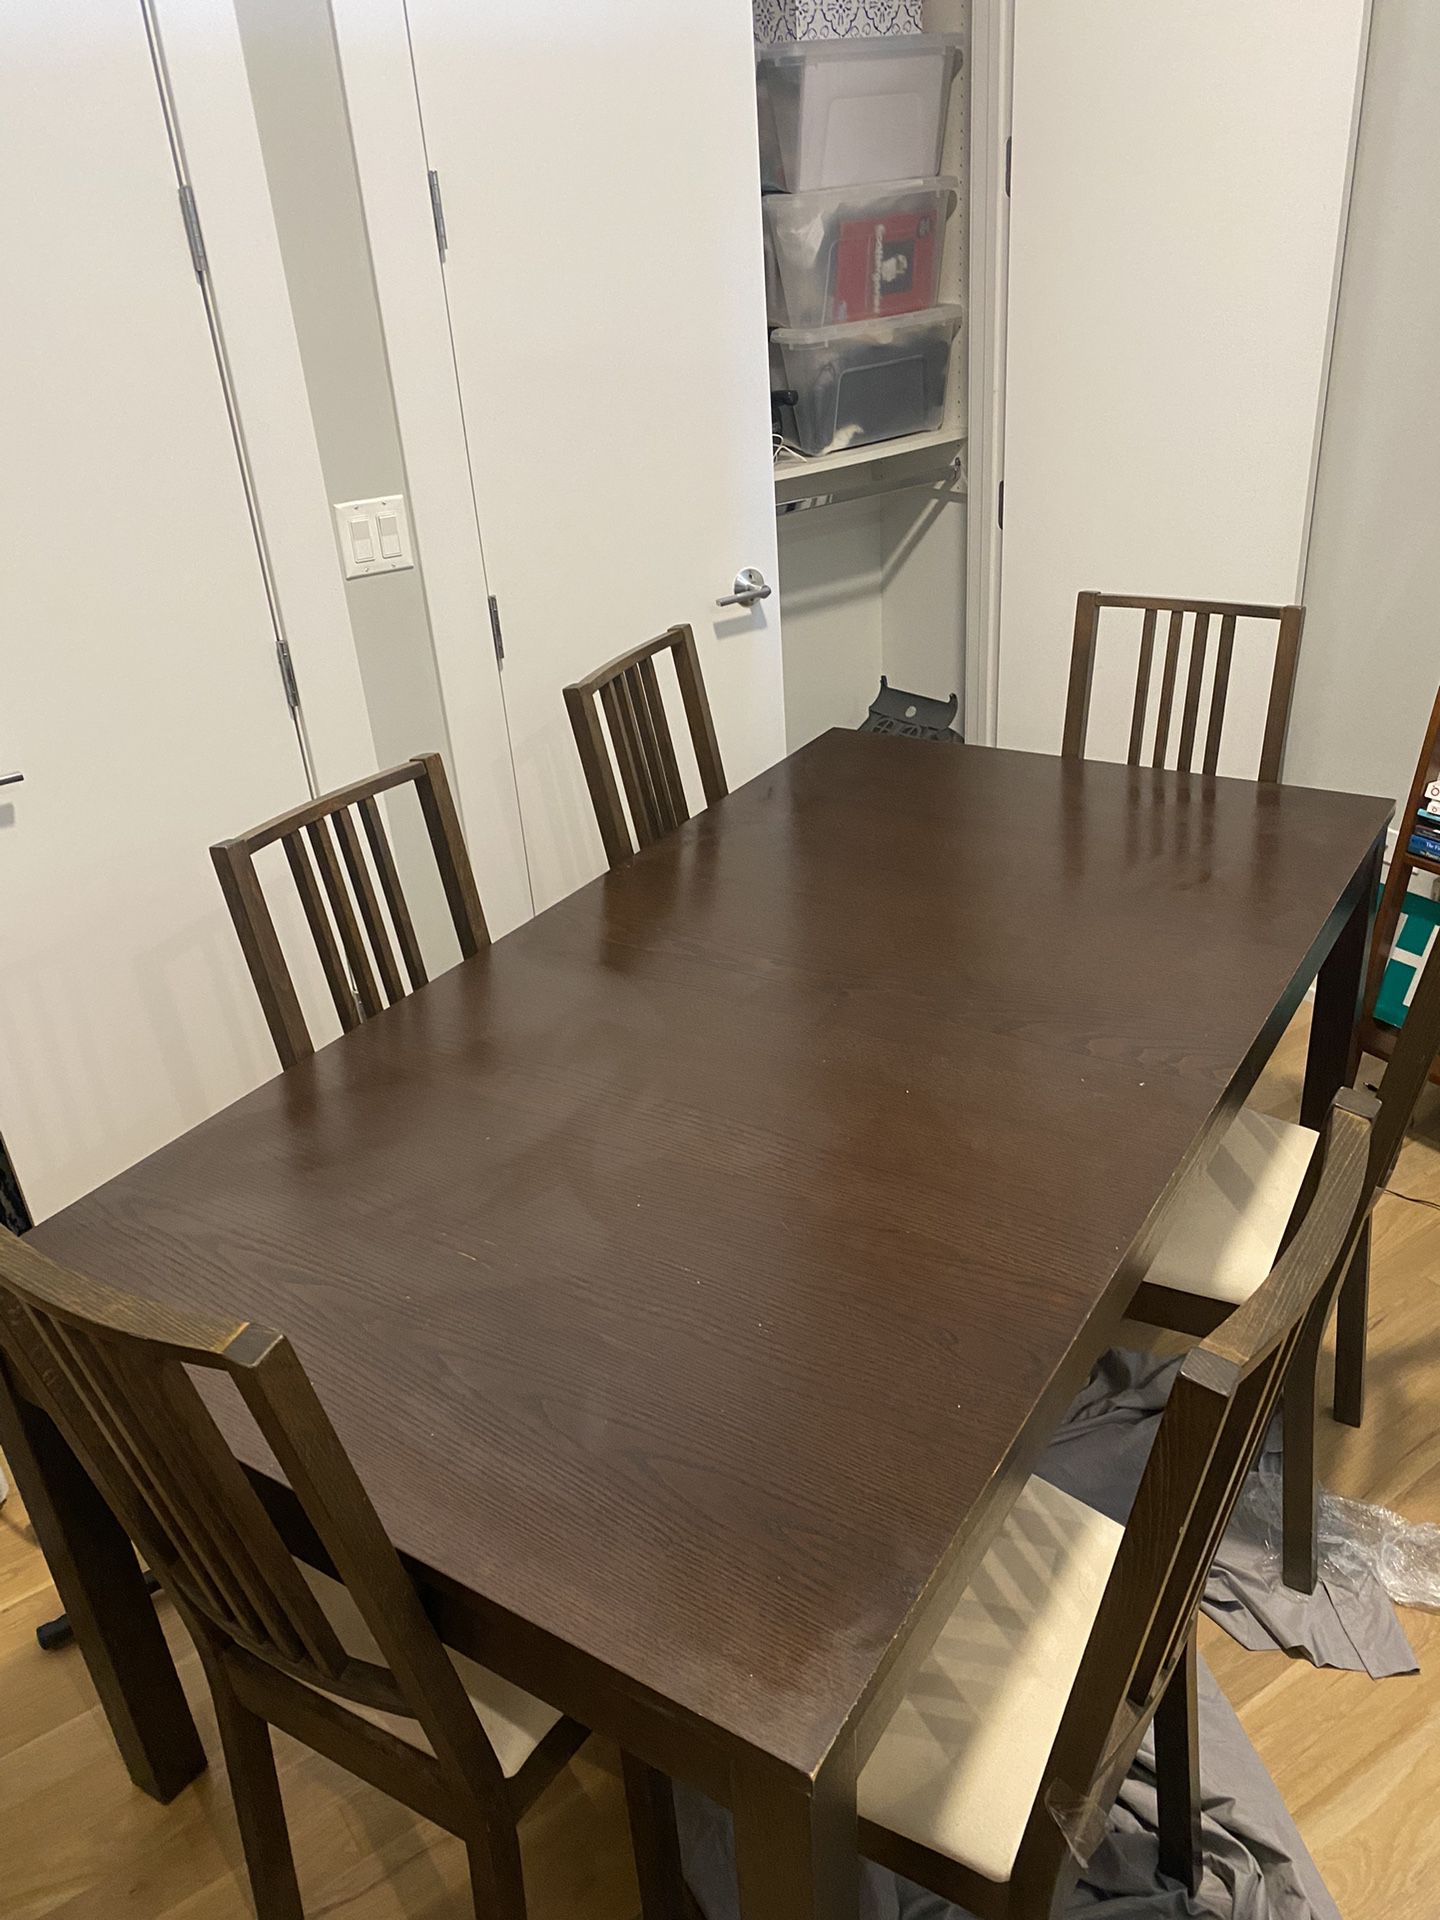 68 Inch Dinning Room Table with 6 Chairs